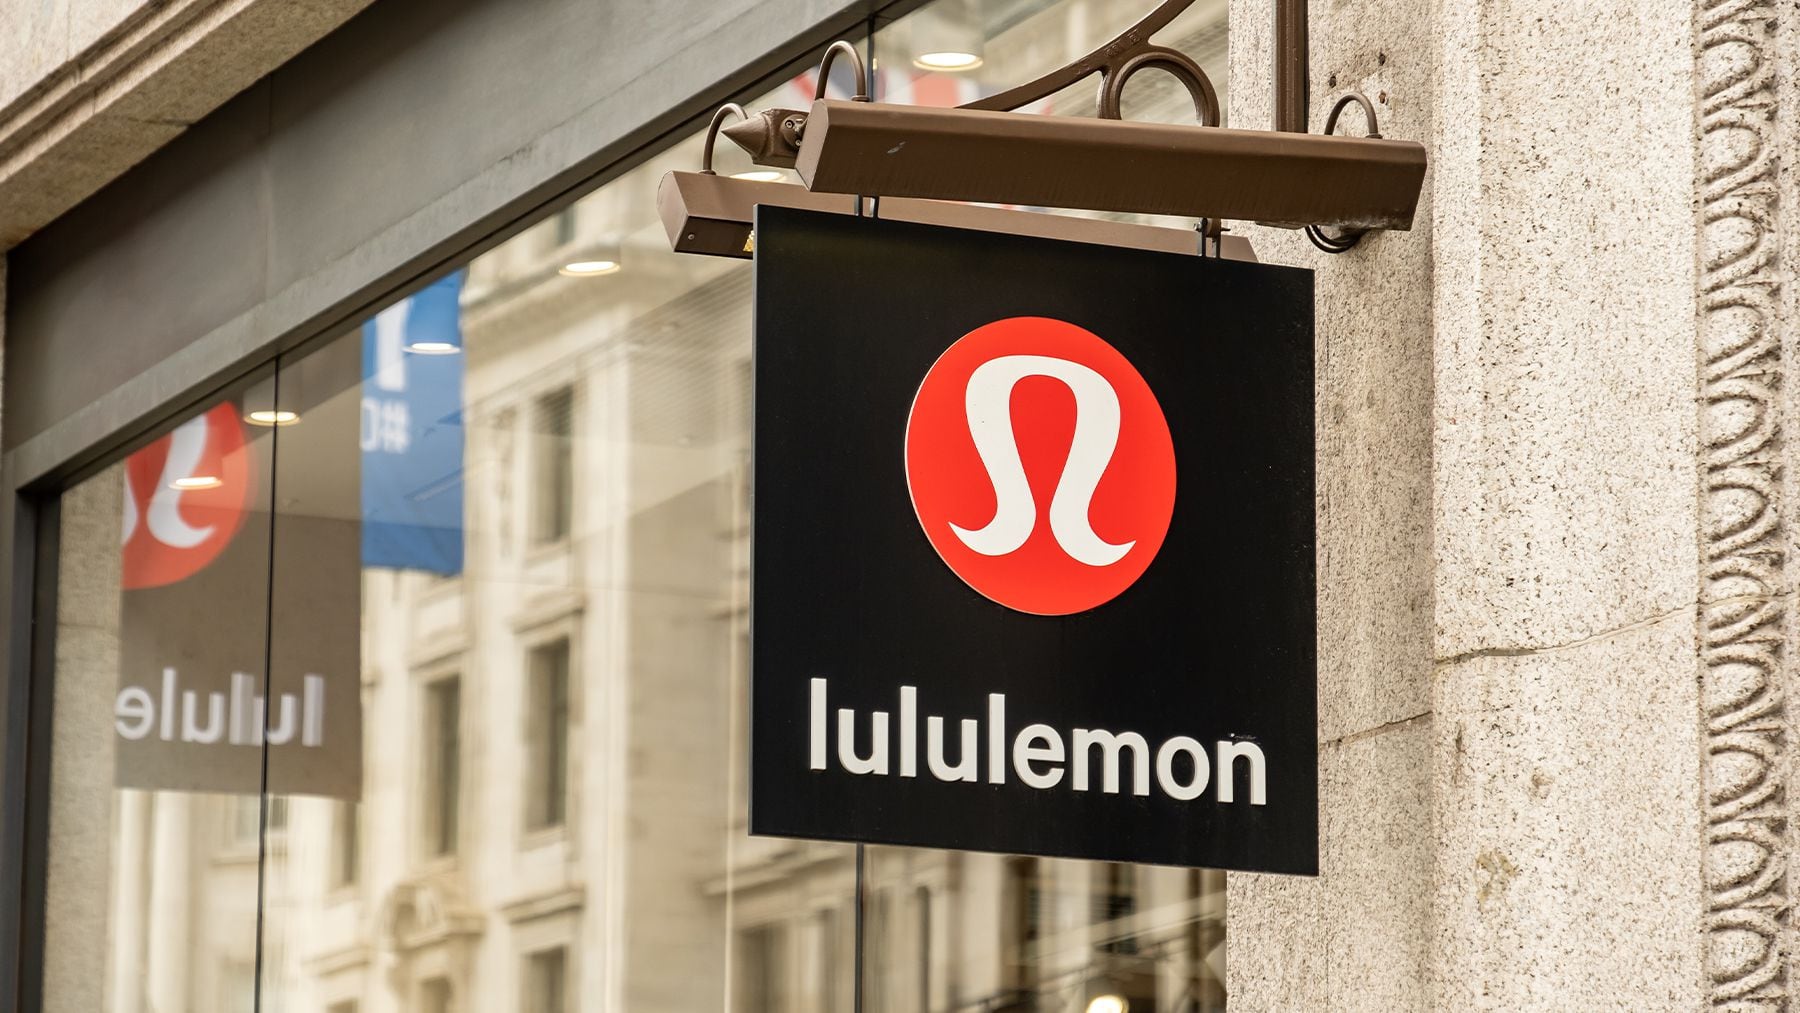 Lululemon’s Sales Growth is Slowing Ahead of the Holidays